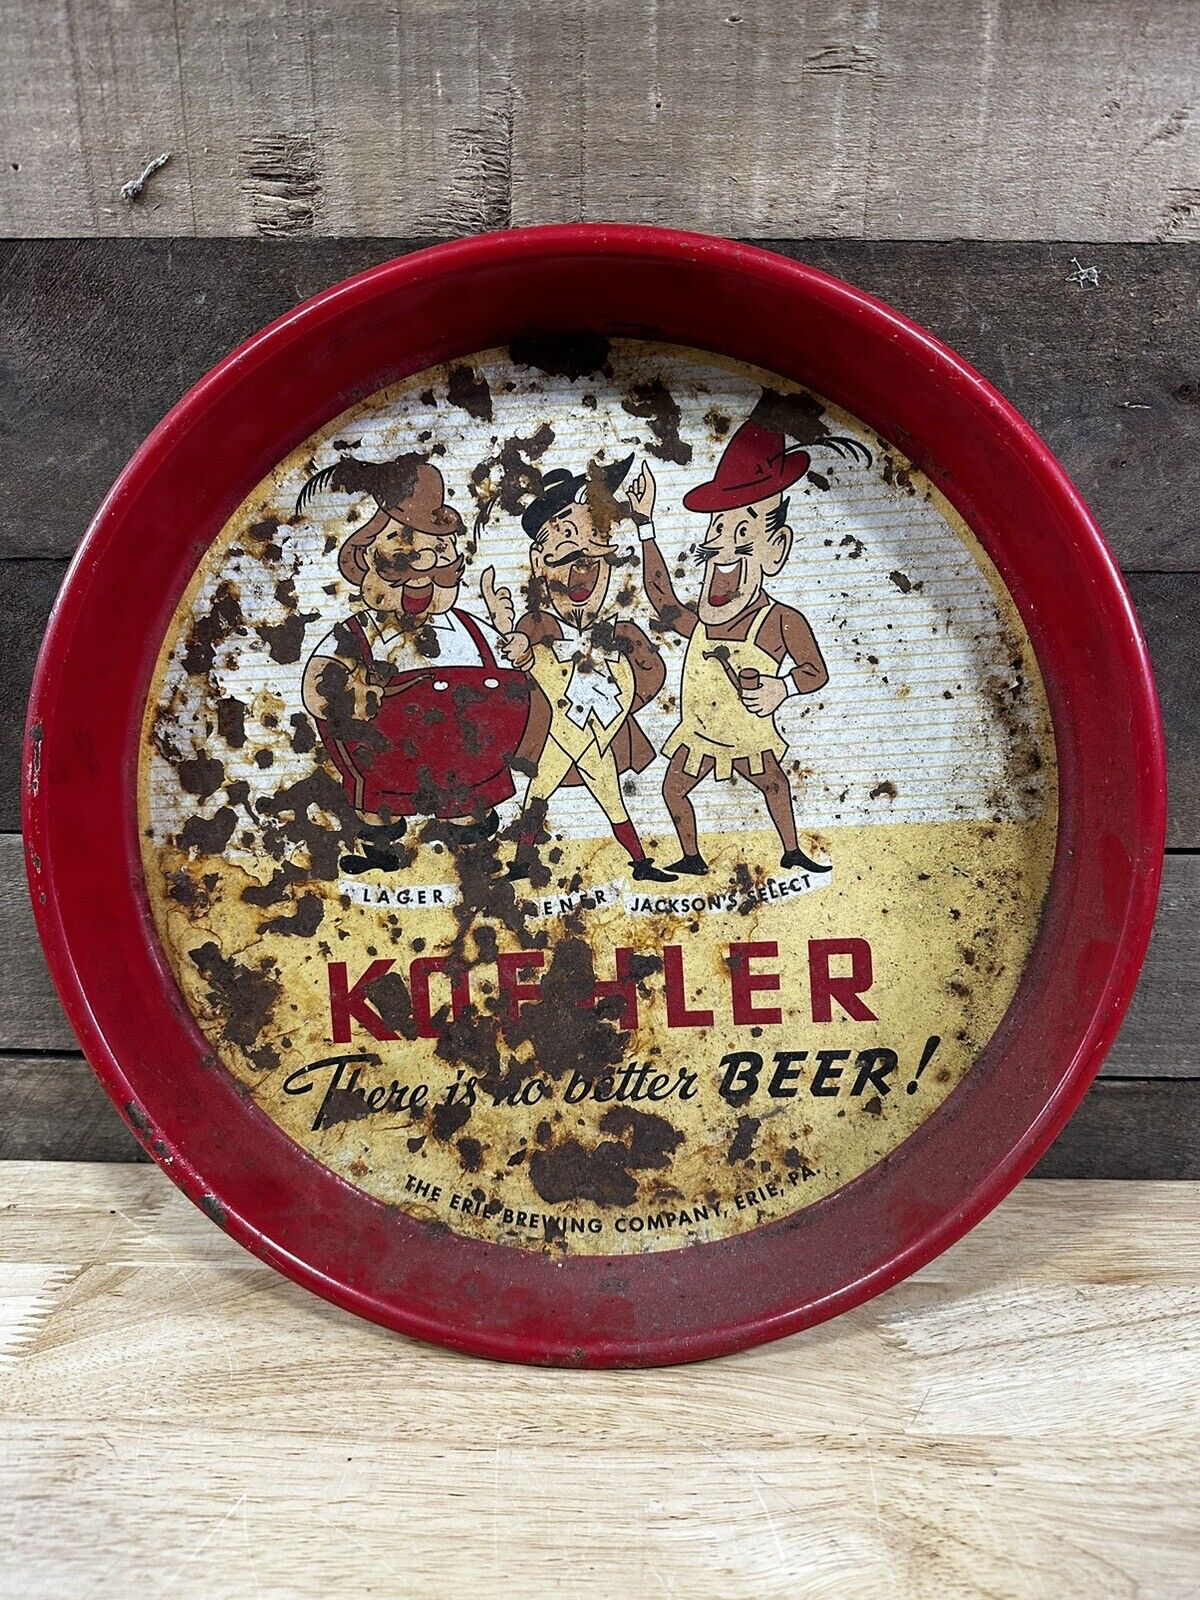 Vintage Koehler’s Tin Beer Tray Erie Brewing Company